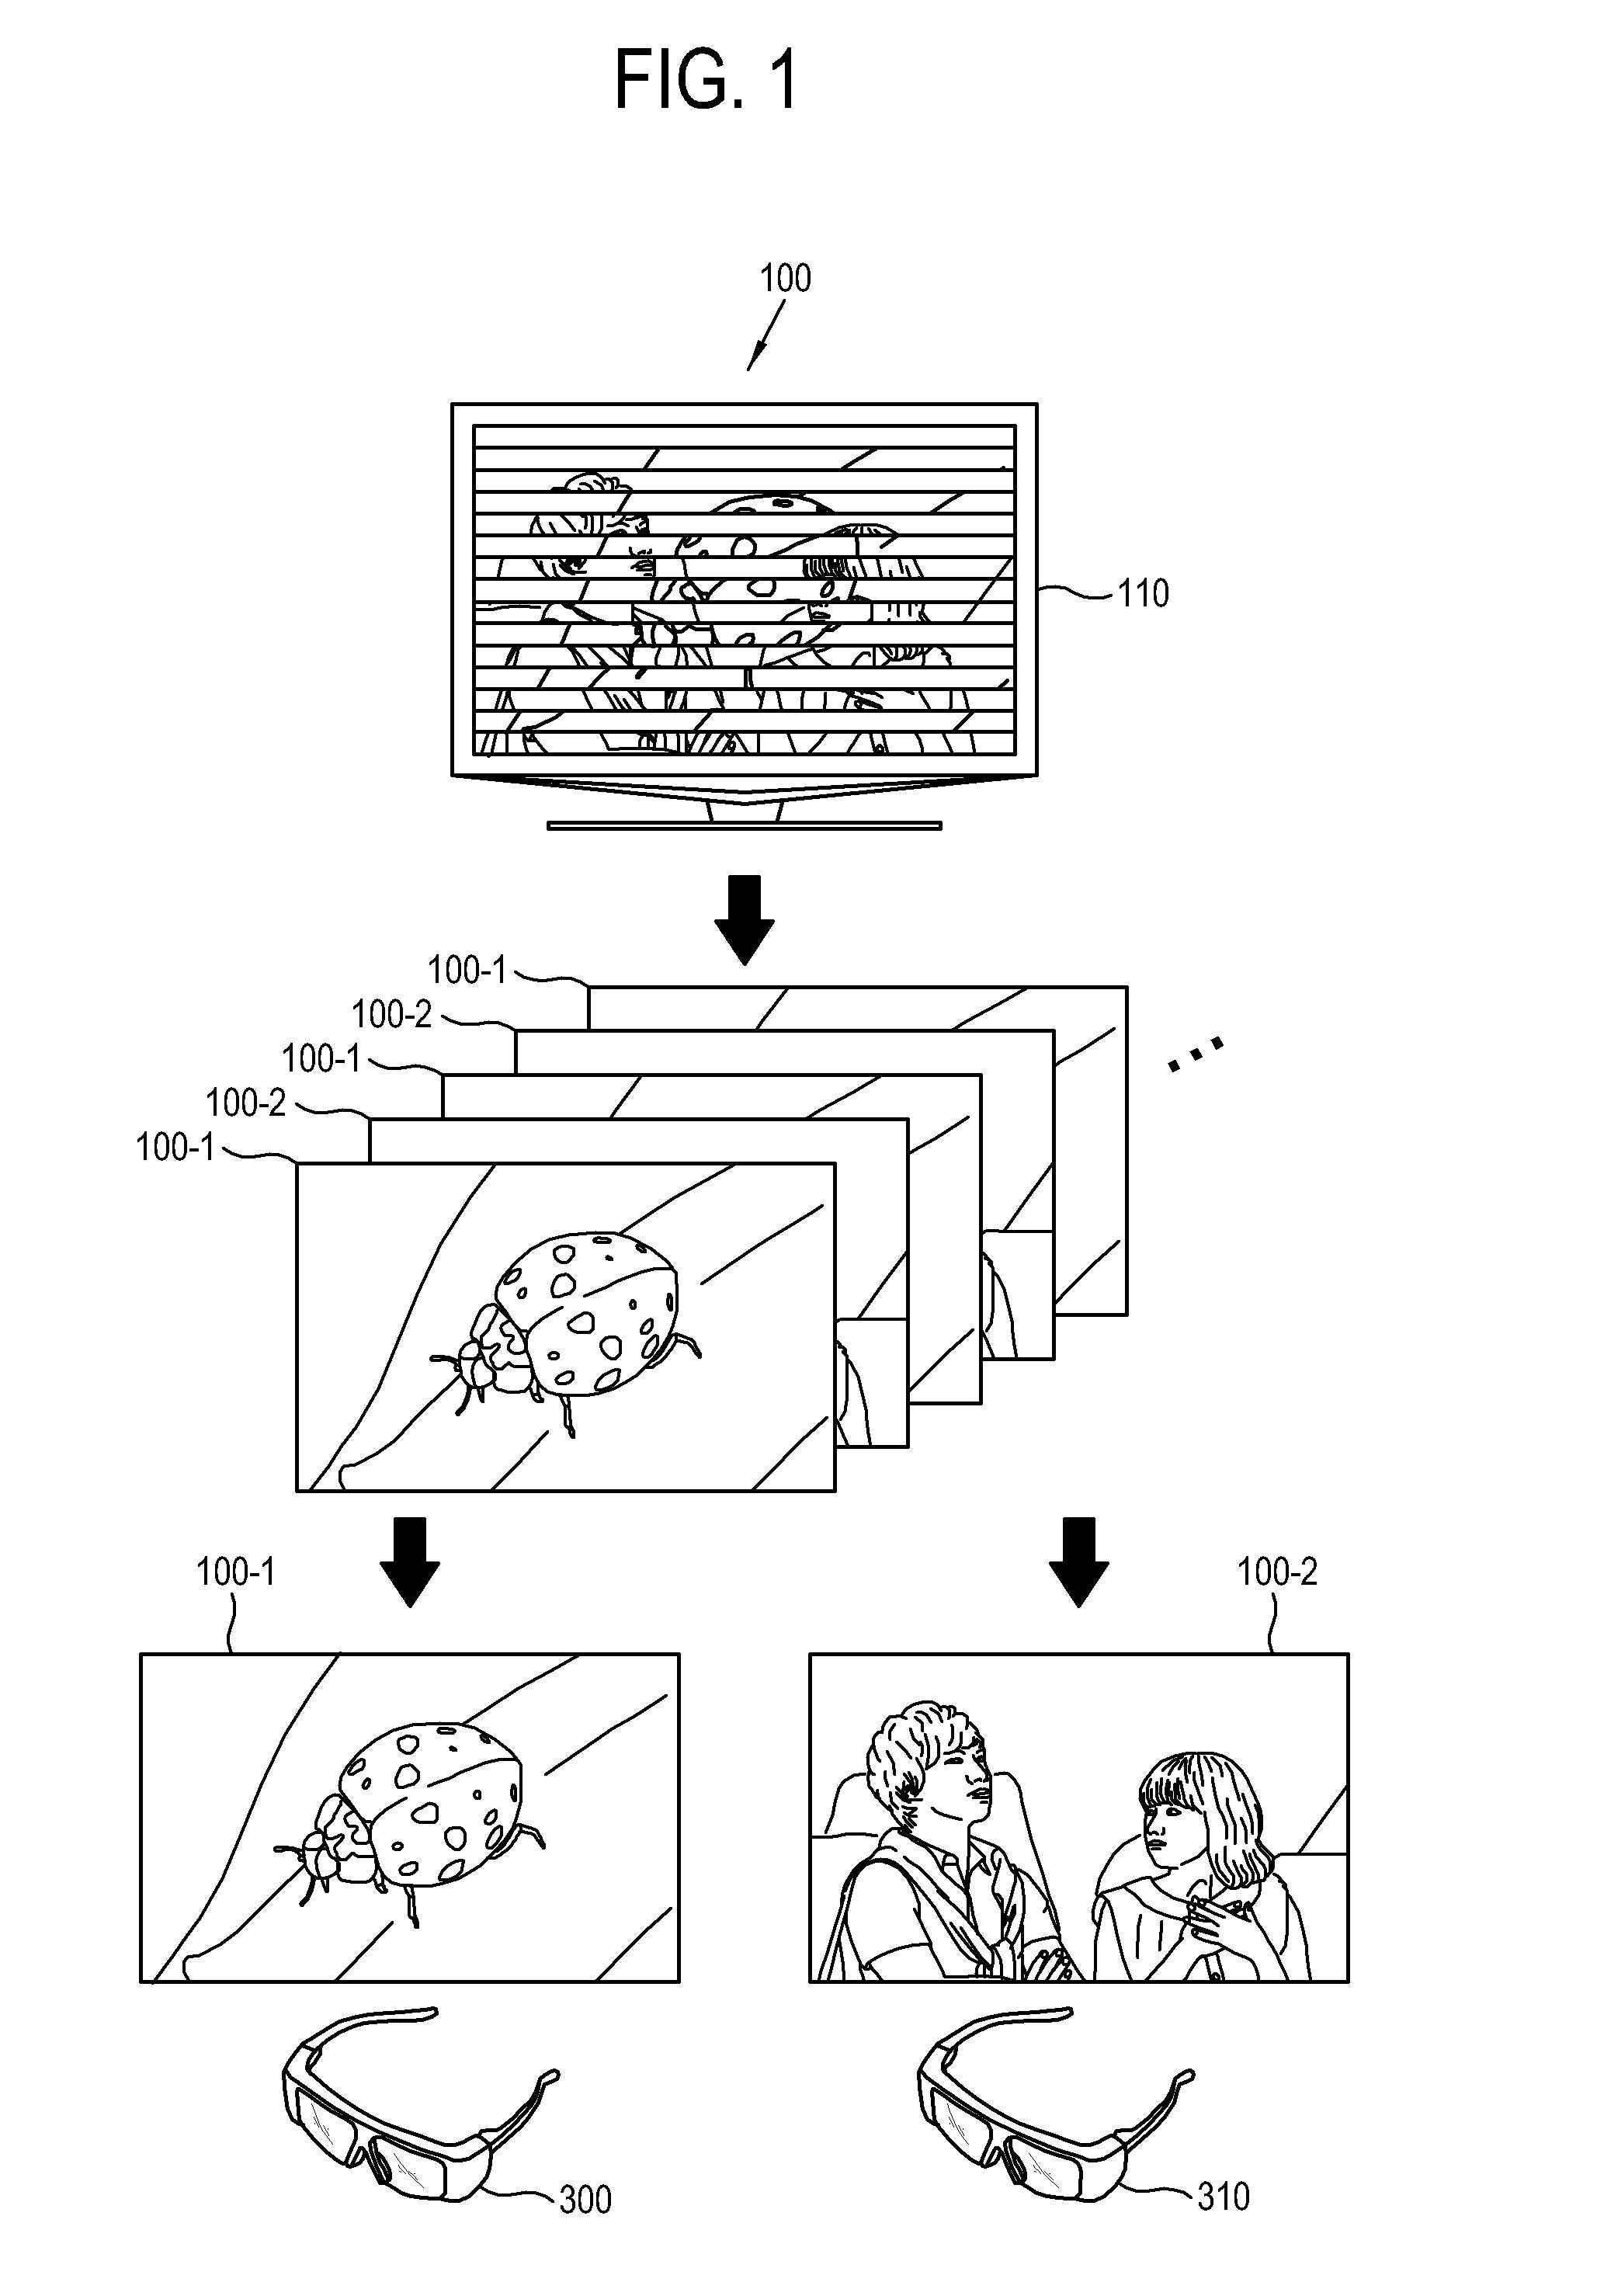 Method of controlling a wireless audio signal